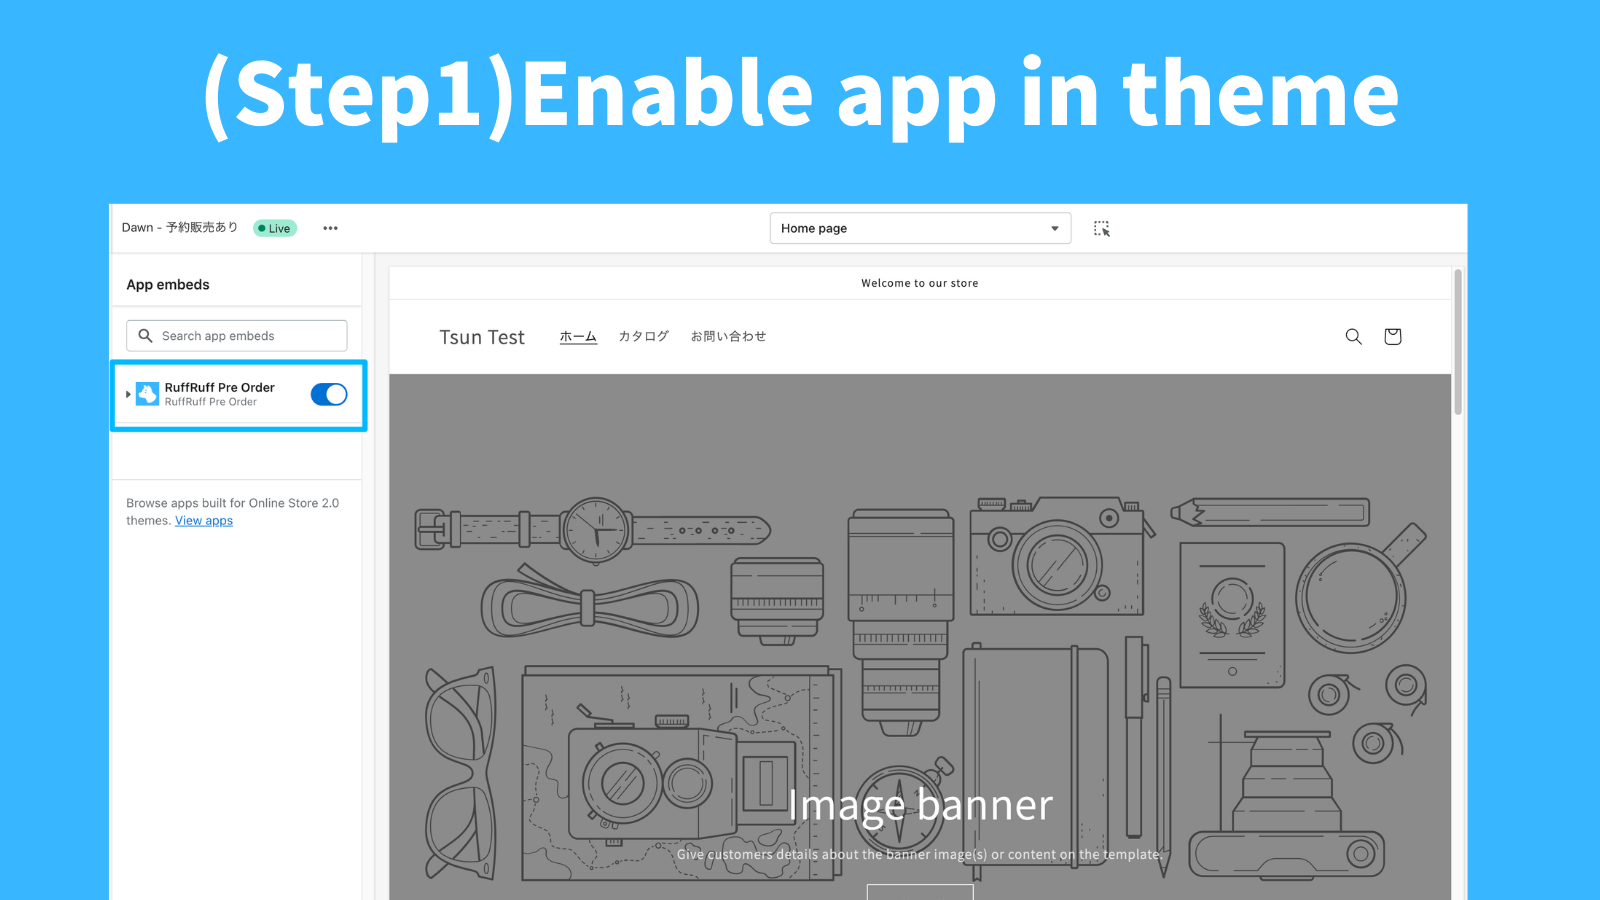 (Step1) Enable app in theme